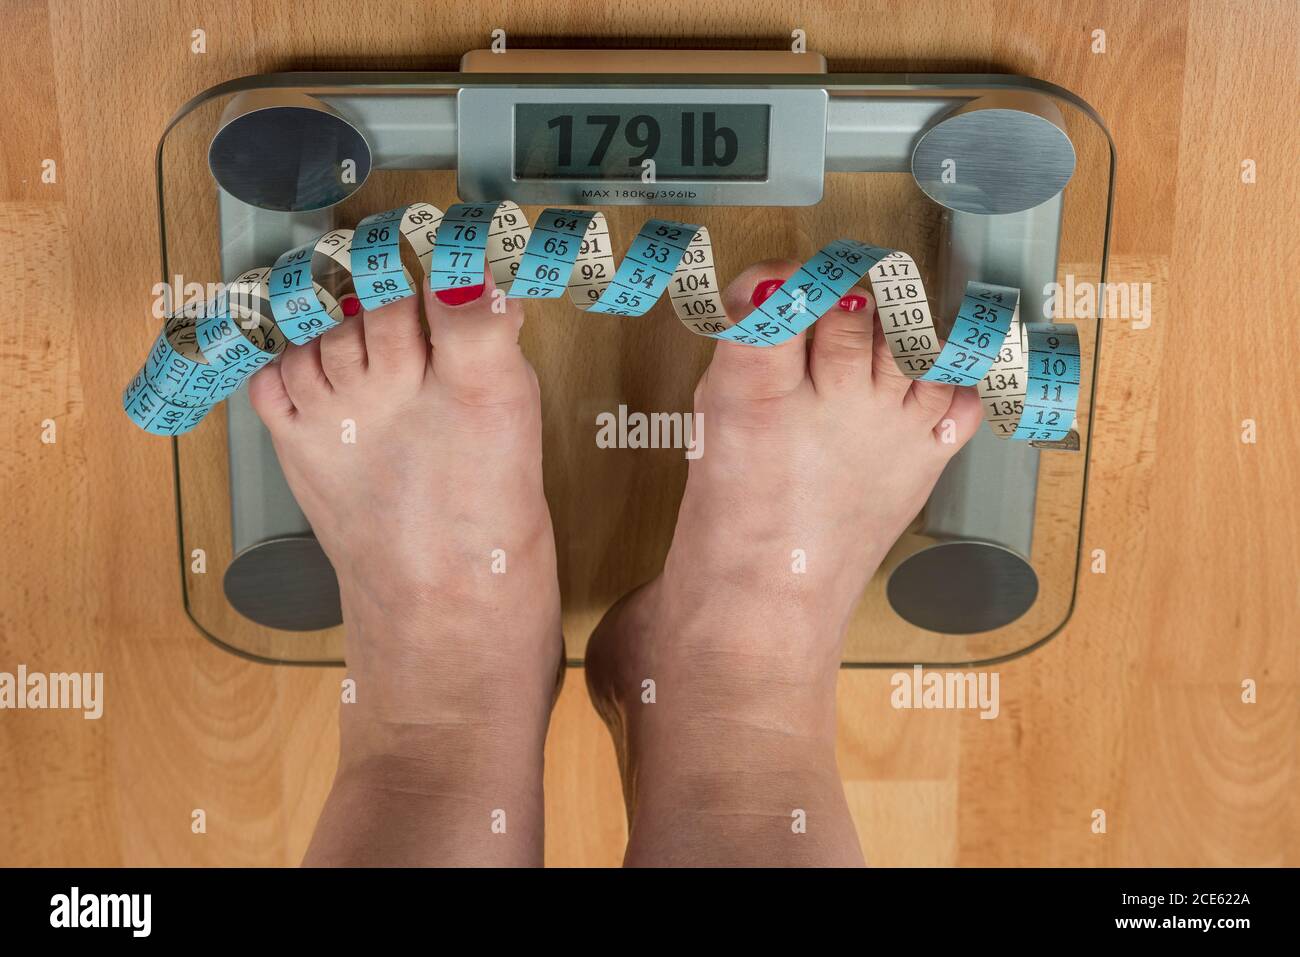 https://c8.alamy.com/comp/2CE622A/a-woman-stands-with-two-feet-on-a-scale-overweight-concept-2CE622A.jpg